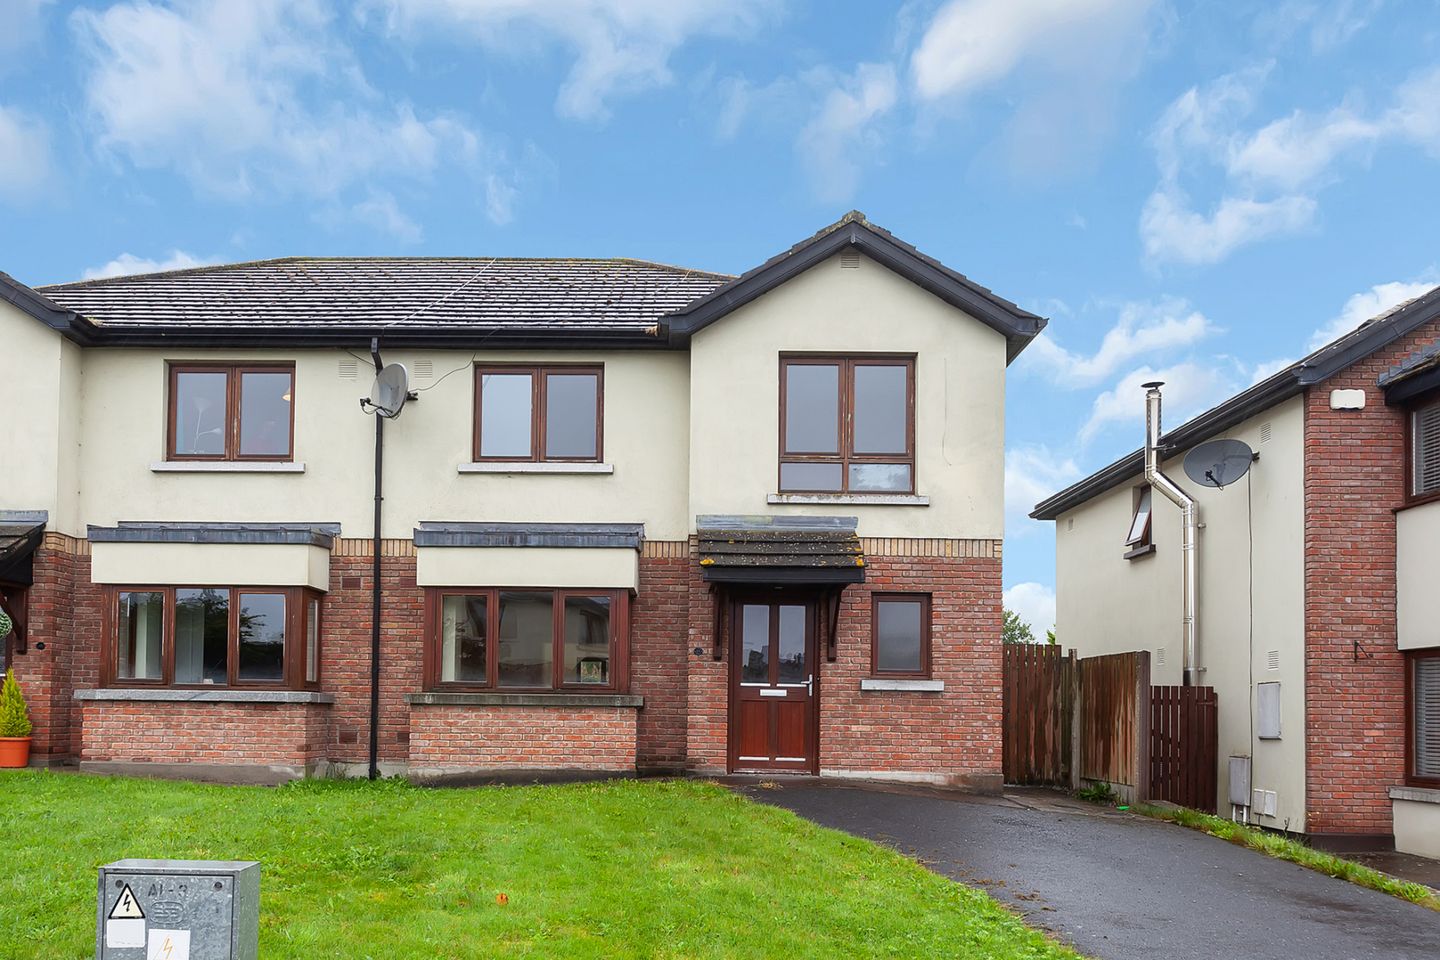 17 Russell Close, Gracefield Manor, Ballylynan, Athy, Co. Kildare, R14HY49